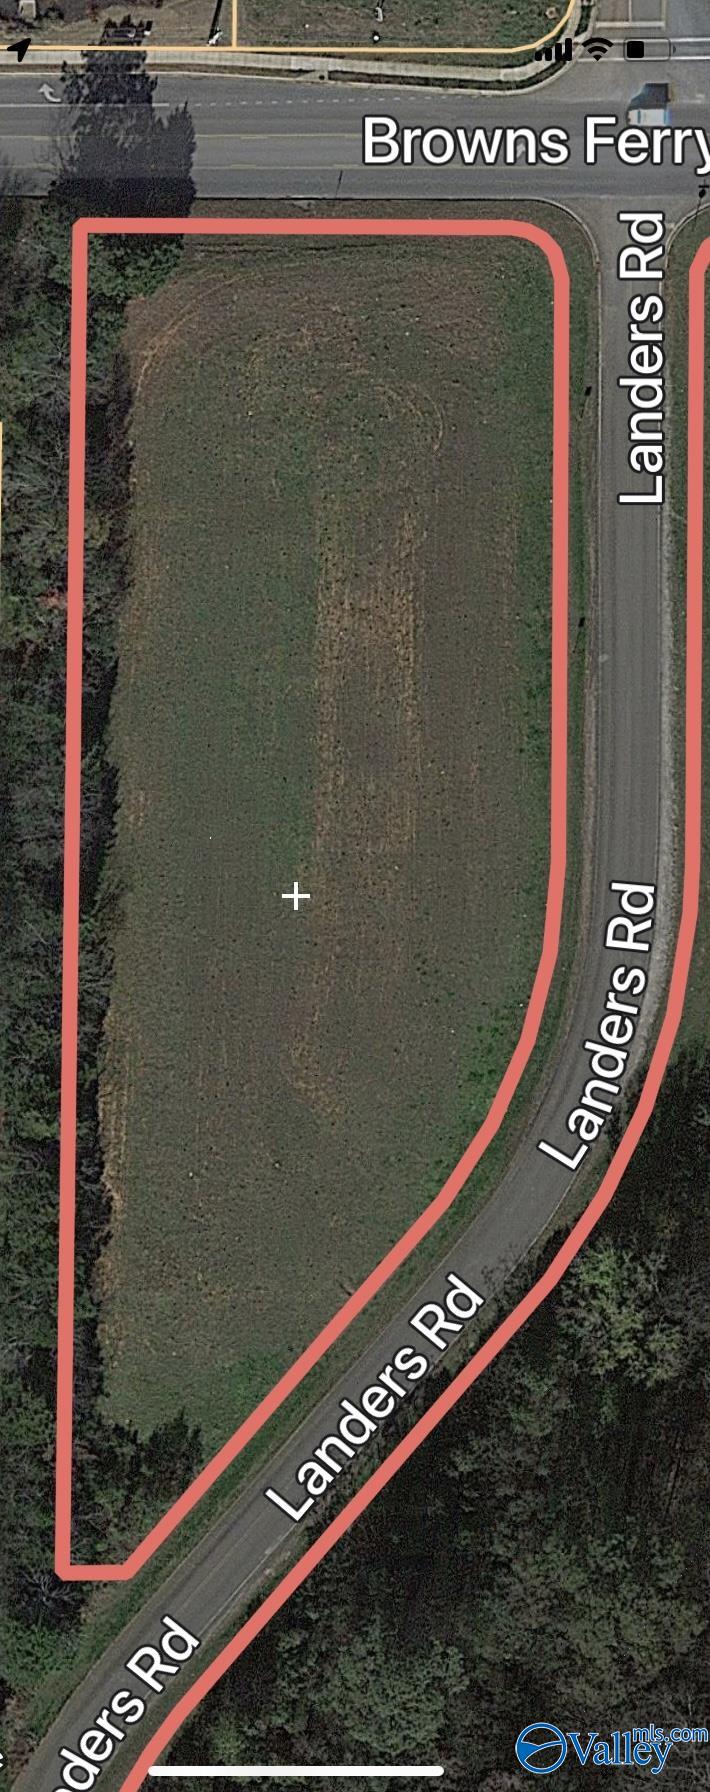 Property: 2 Acres Browns Ferry Road,Madison, AL